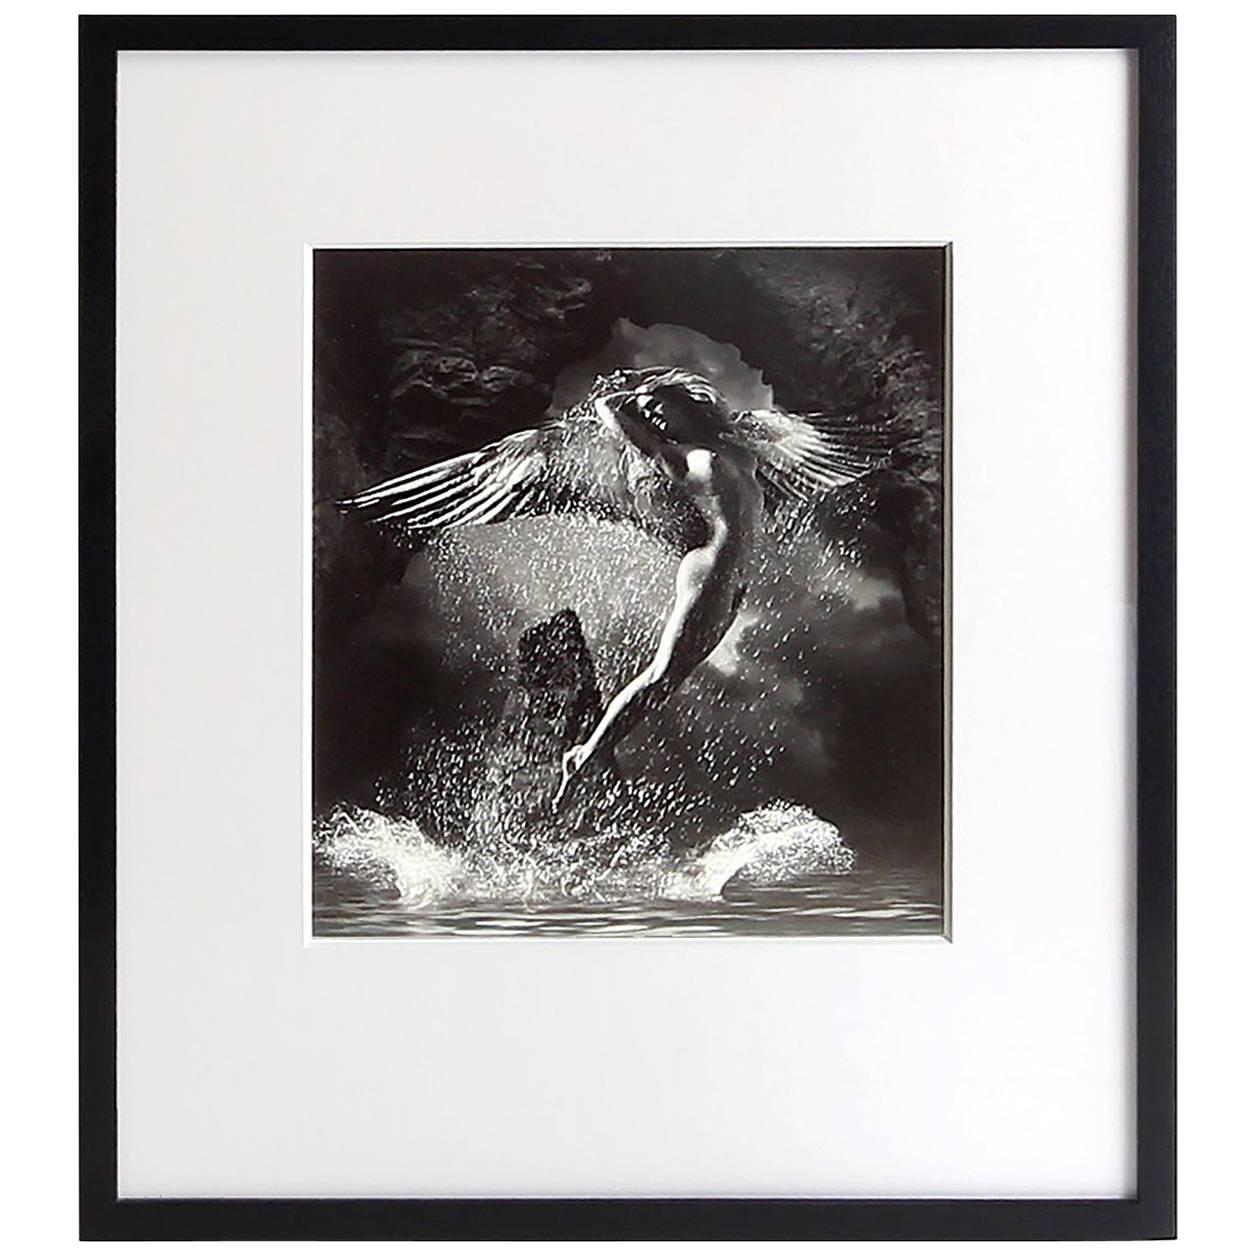 Framed Silver Print Photograph 'The Guardian' by James Porto, 2001 For Sale